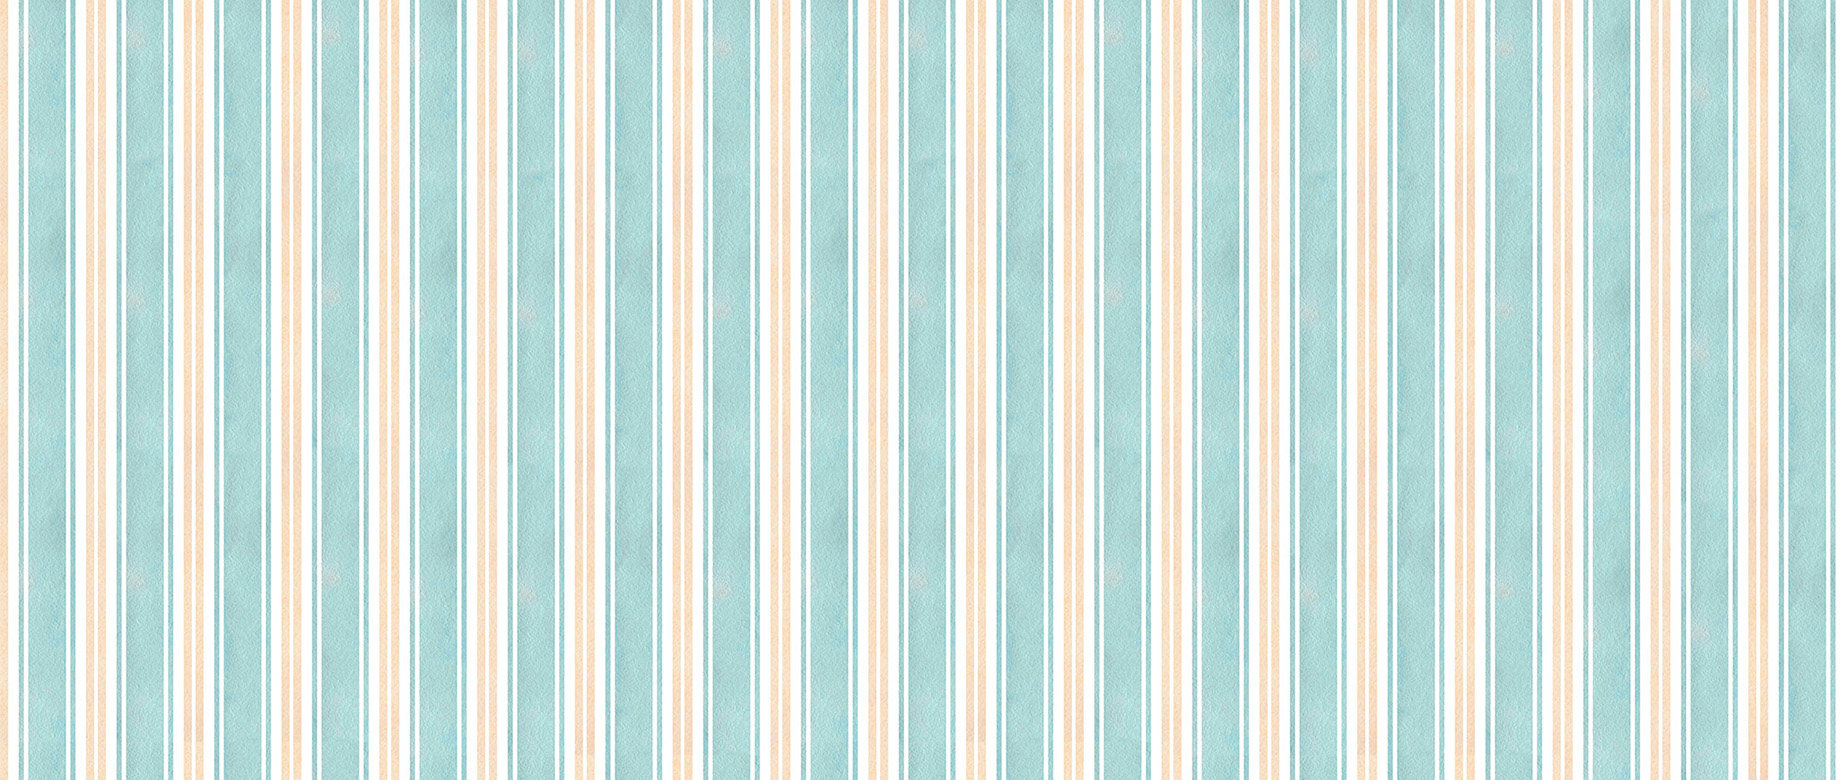 teal-stripes-design-Seamless design repeat pattern wallpaper-in-wide-room